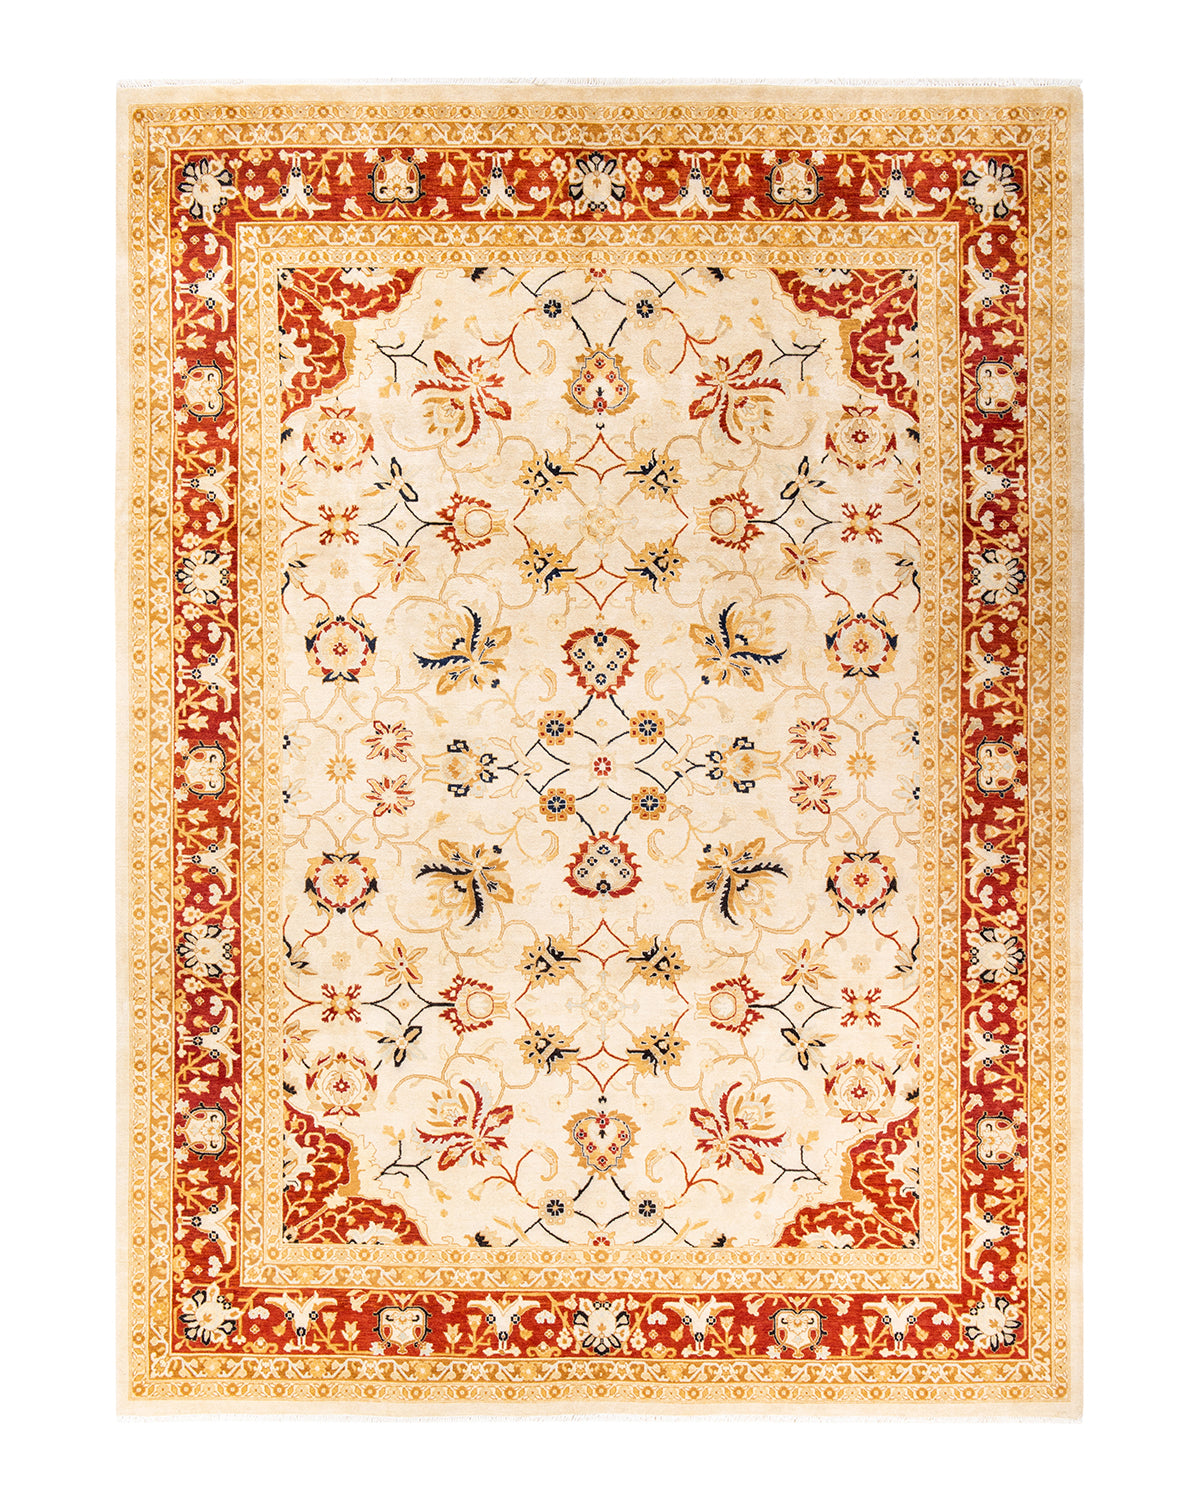 Eclectic, One-of-a-Kind Hand-Knotted Area Rug  - Ivory, 9' 1" x 12' 4"